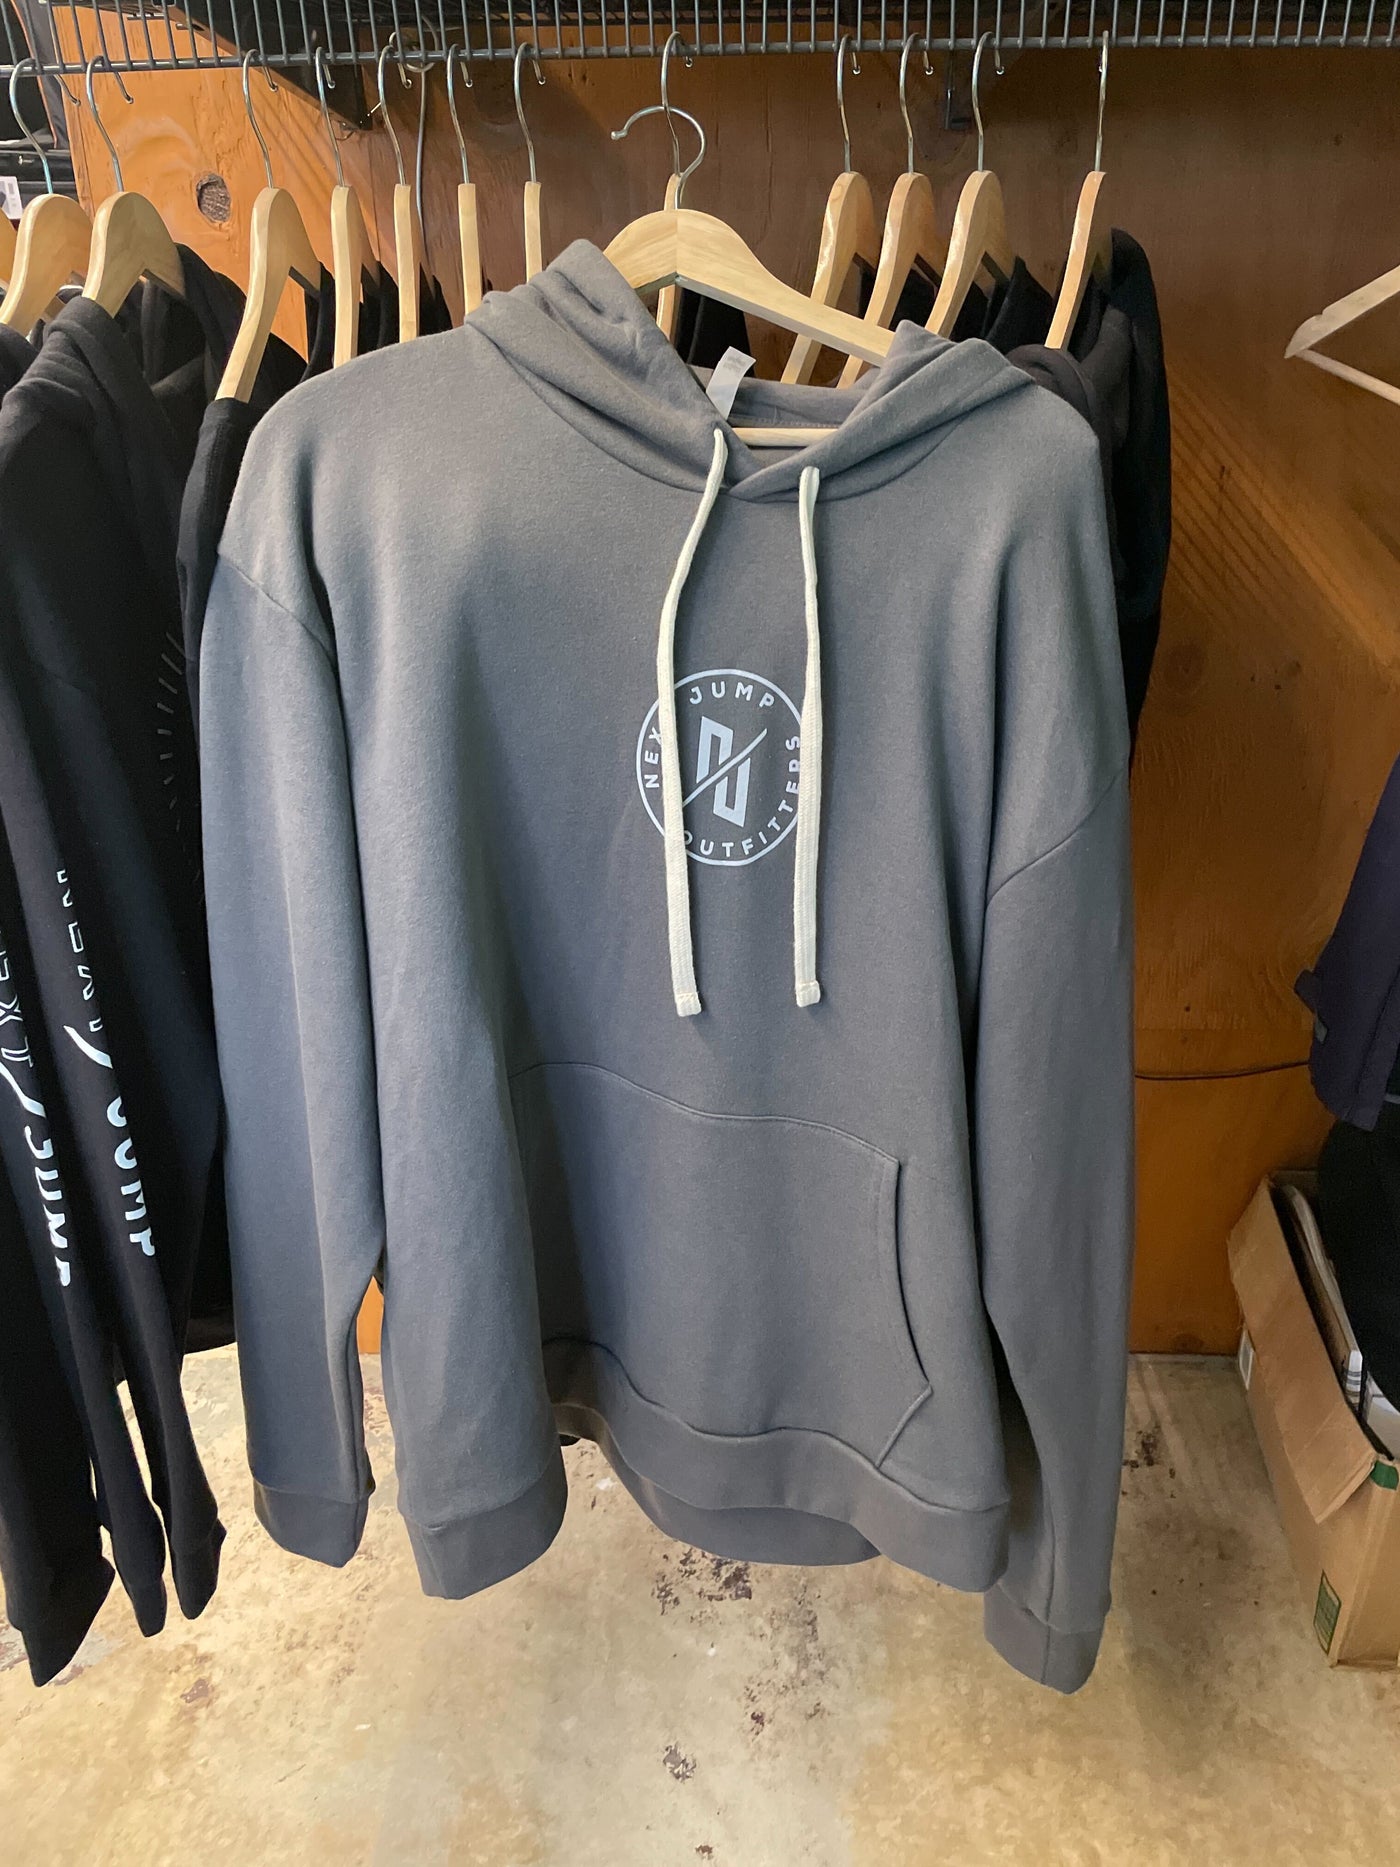 Next Jump Outfitters Pullover Hoodie